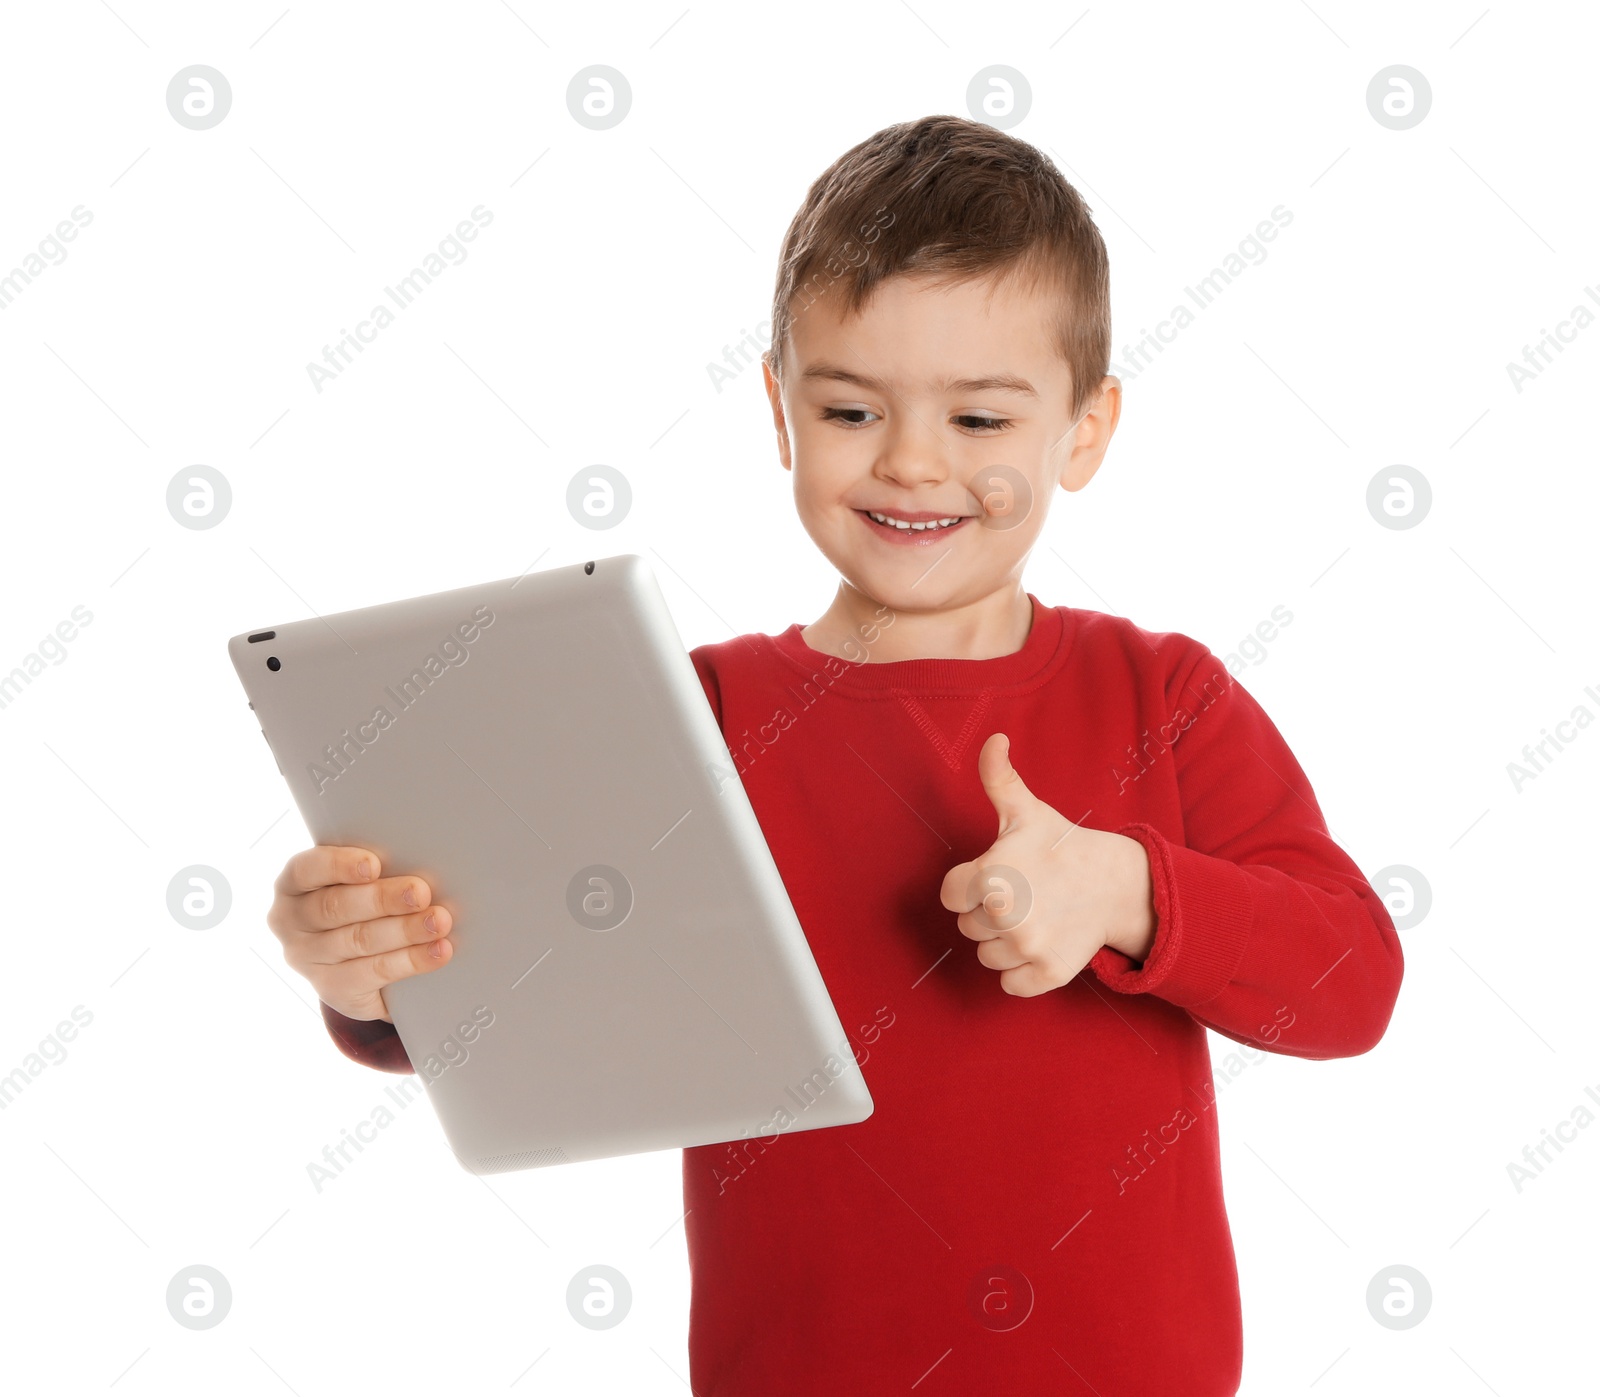 Photo of Little boy using video chat on tablet against white background